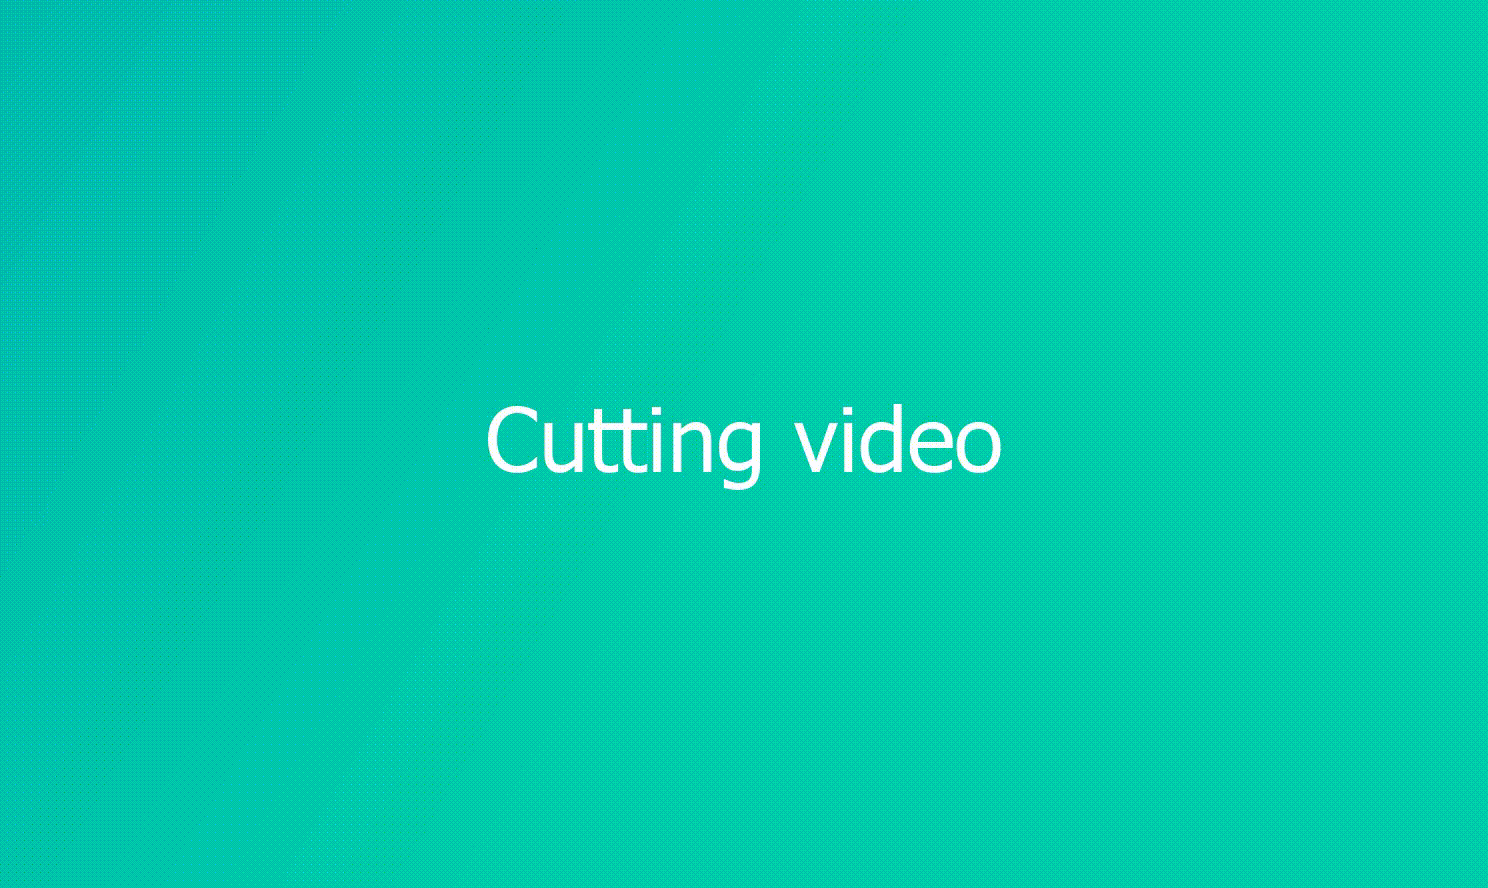 demo cutting up video file